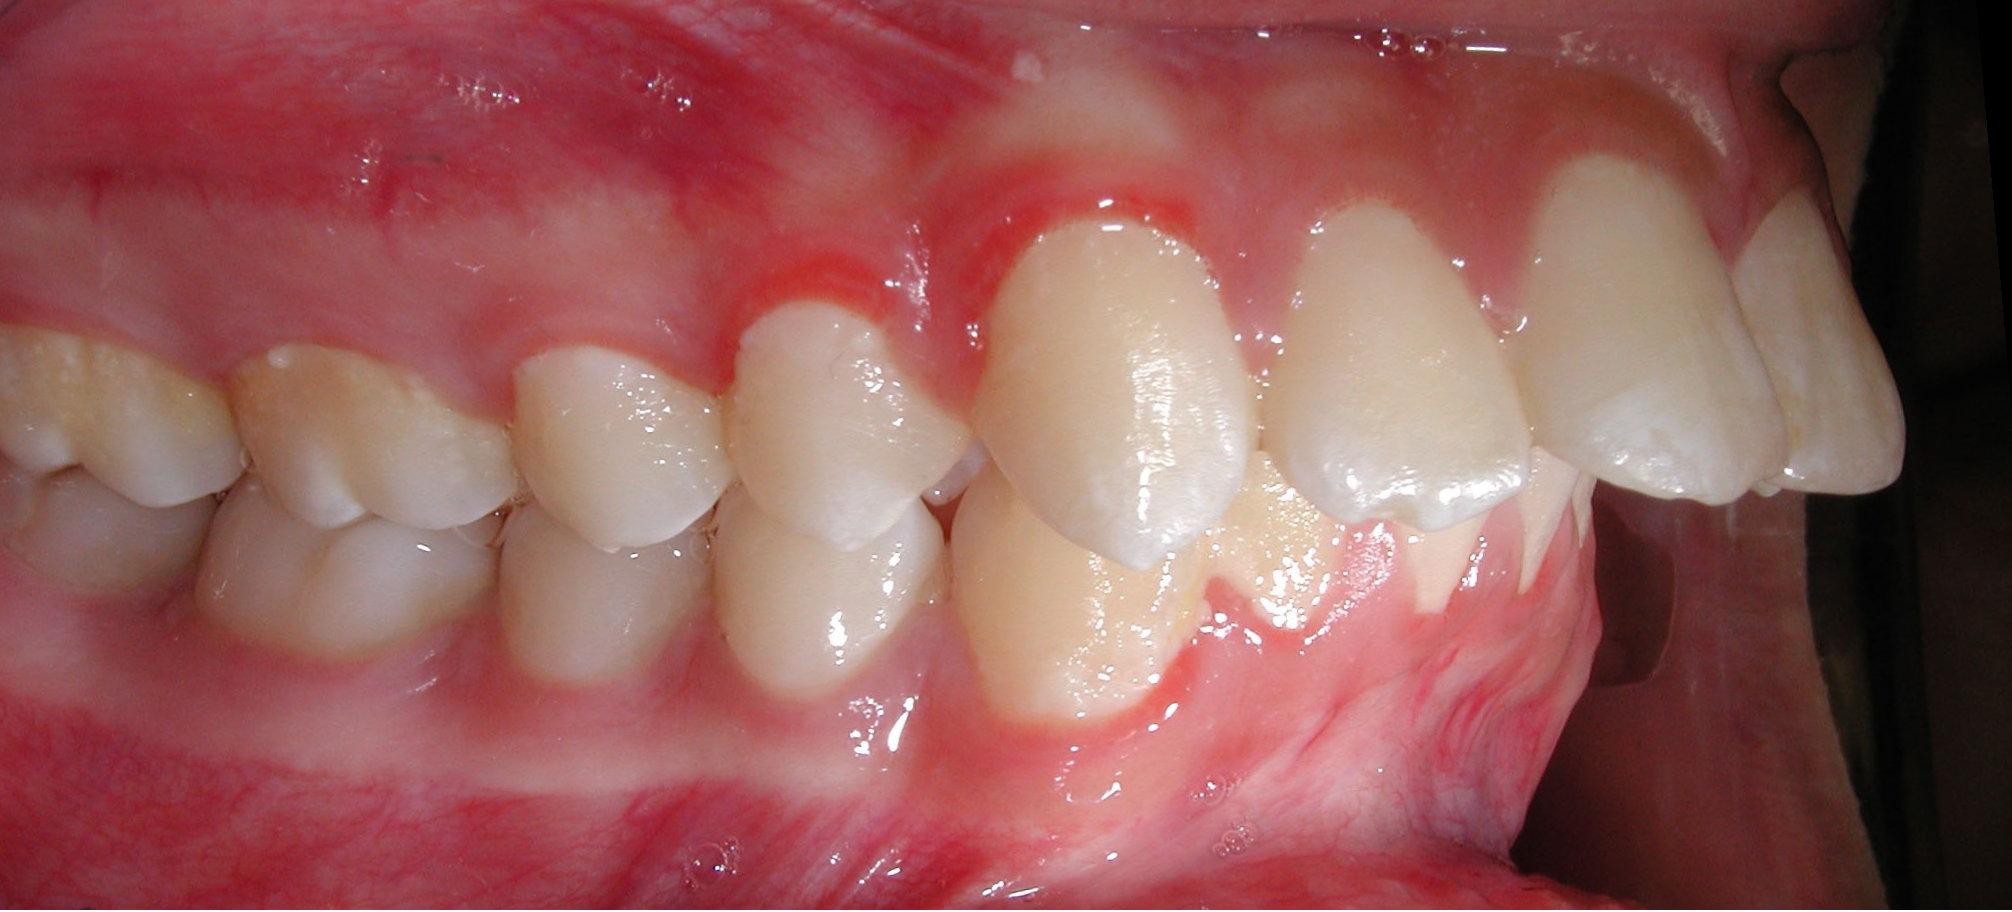 Before treatment With underbite Teeth Image